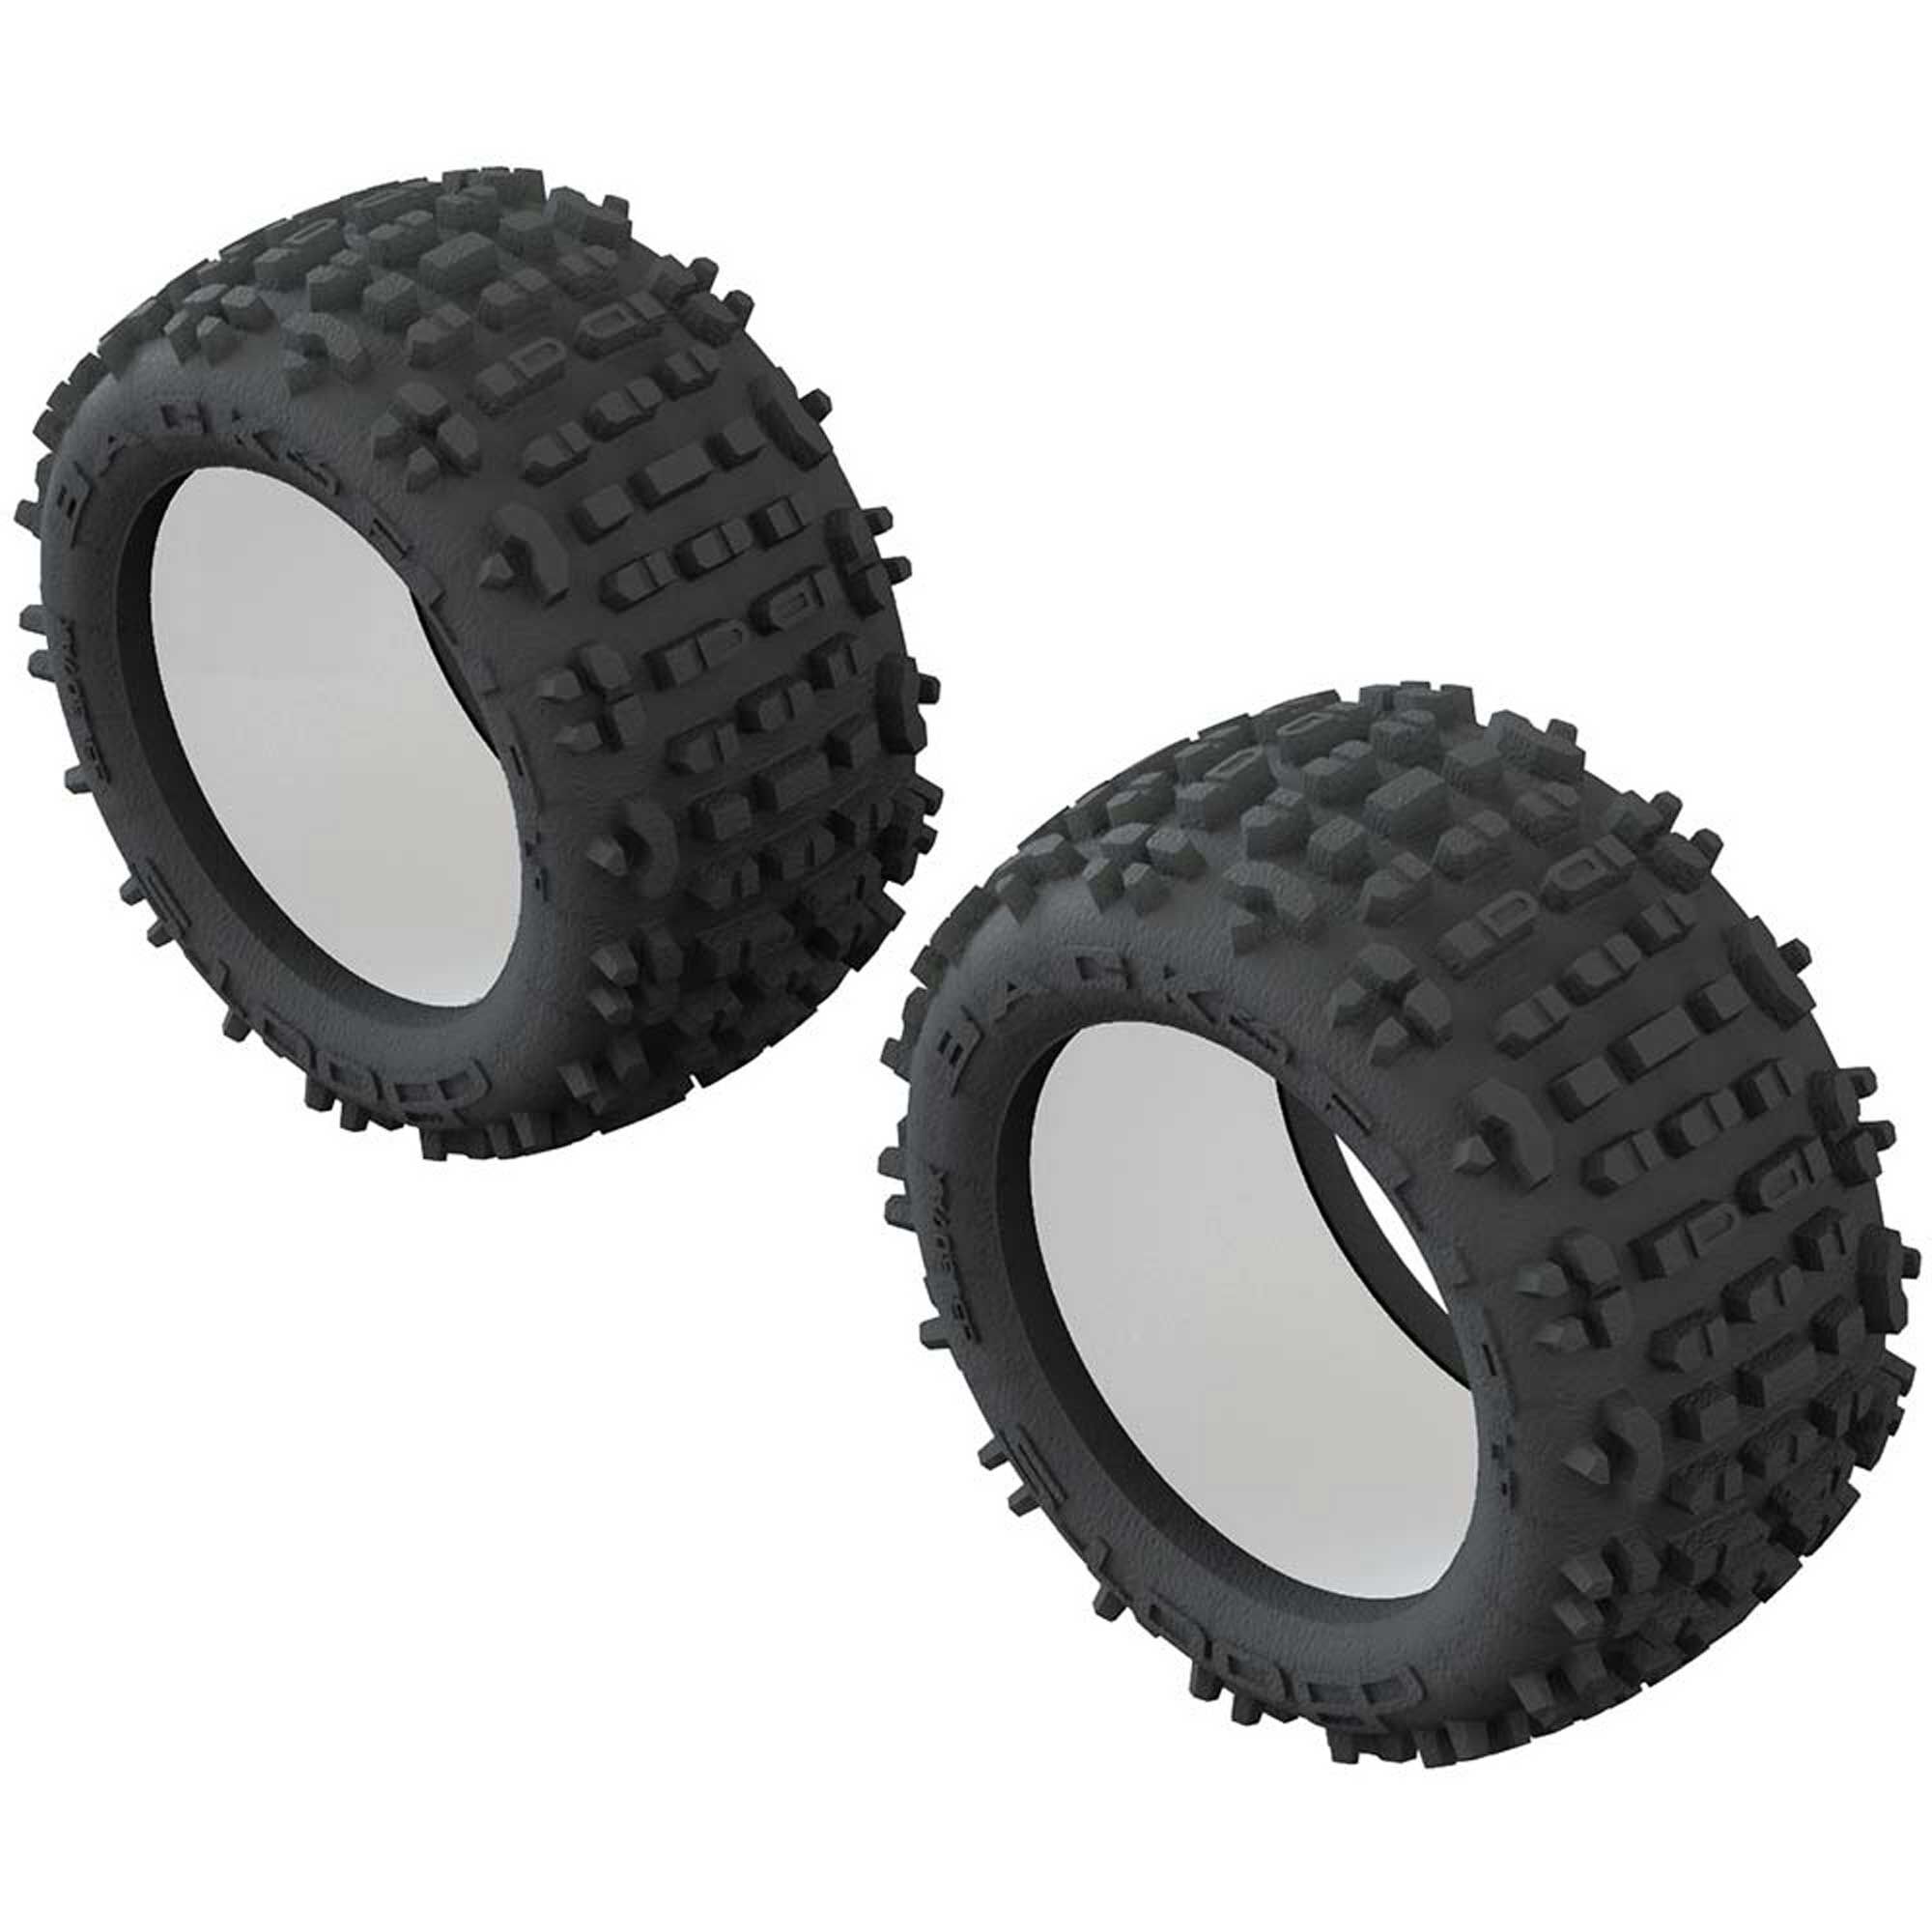 1/8 Scale RC Buggy Tires 17mm RC Wheels Pre-Glued Foam Inserts for Arrma Typhon 6S 3S Talion Senton Redcat Team Losi HPI HSP Set of 4 